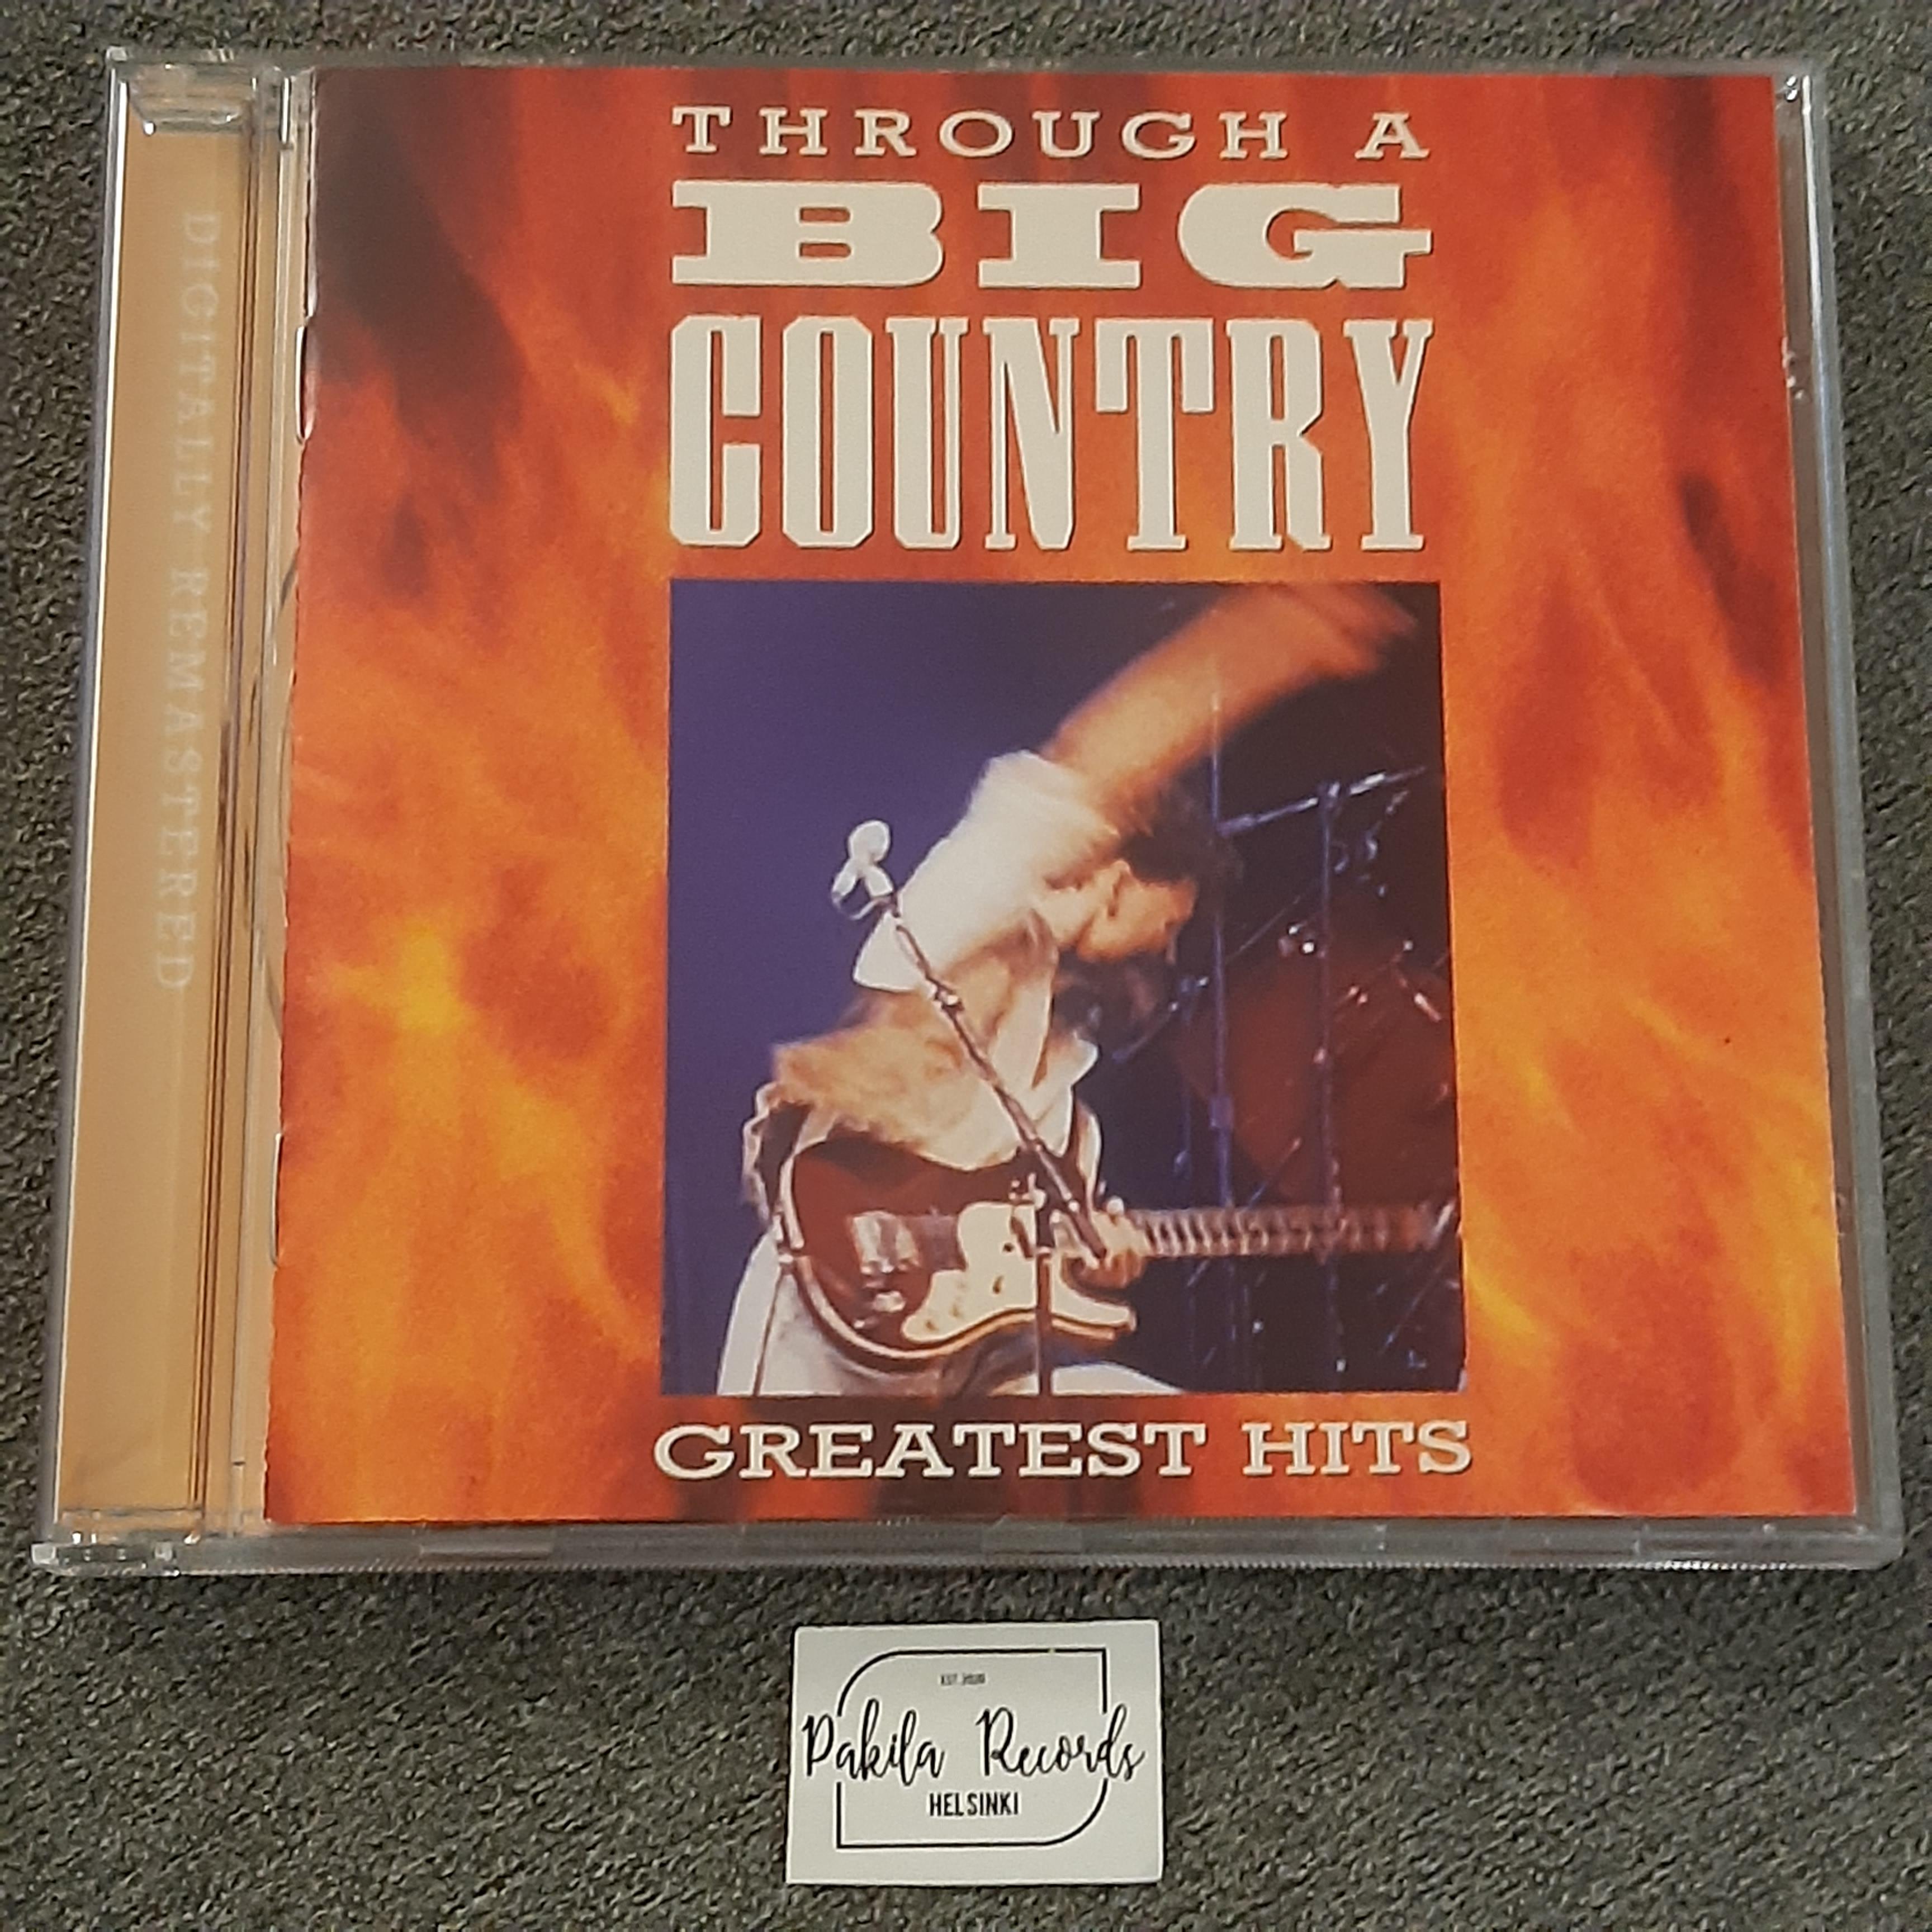 Big Country - Through A Big Country, Greatest Hits - CD (käytetty)